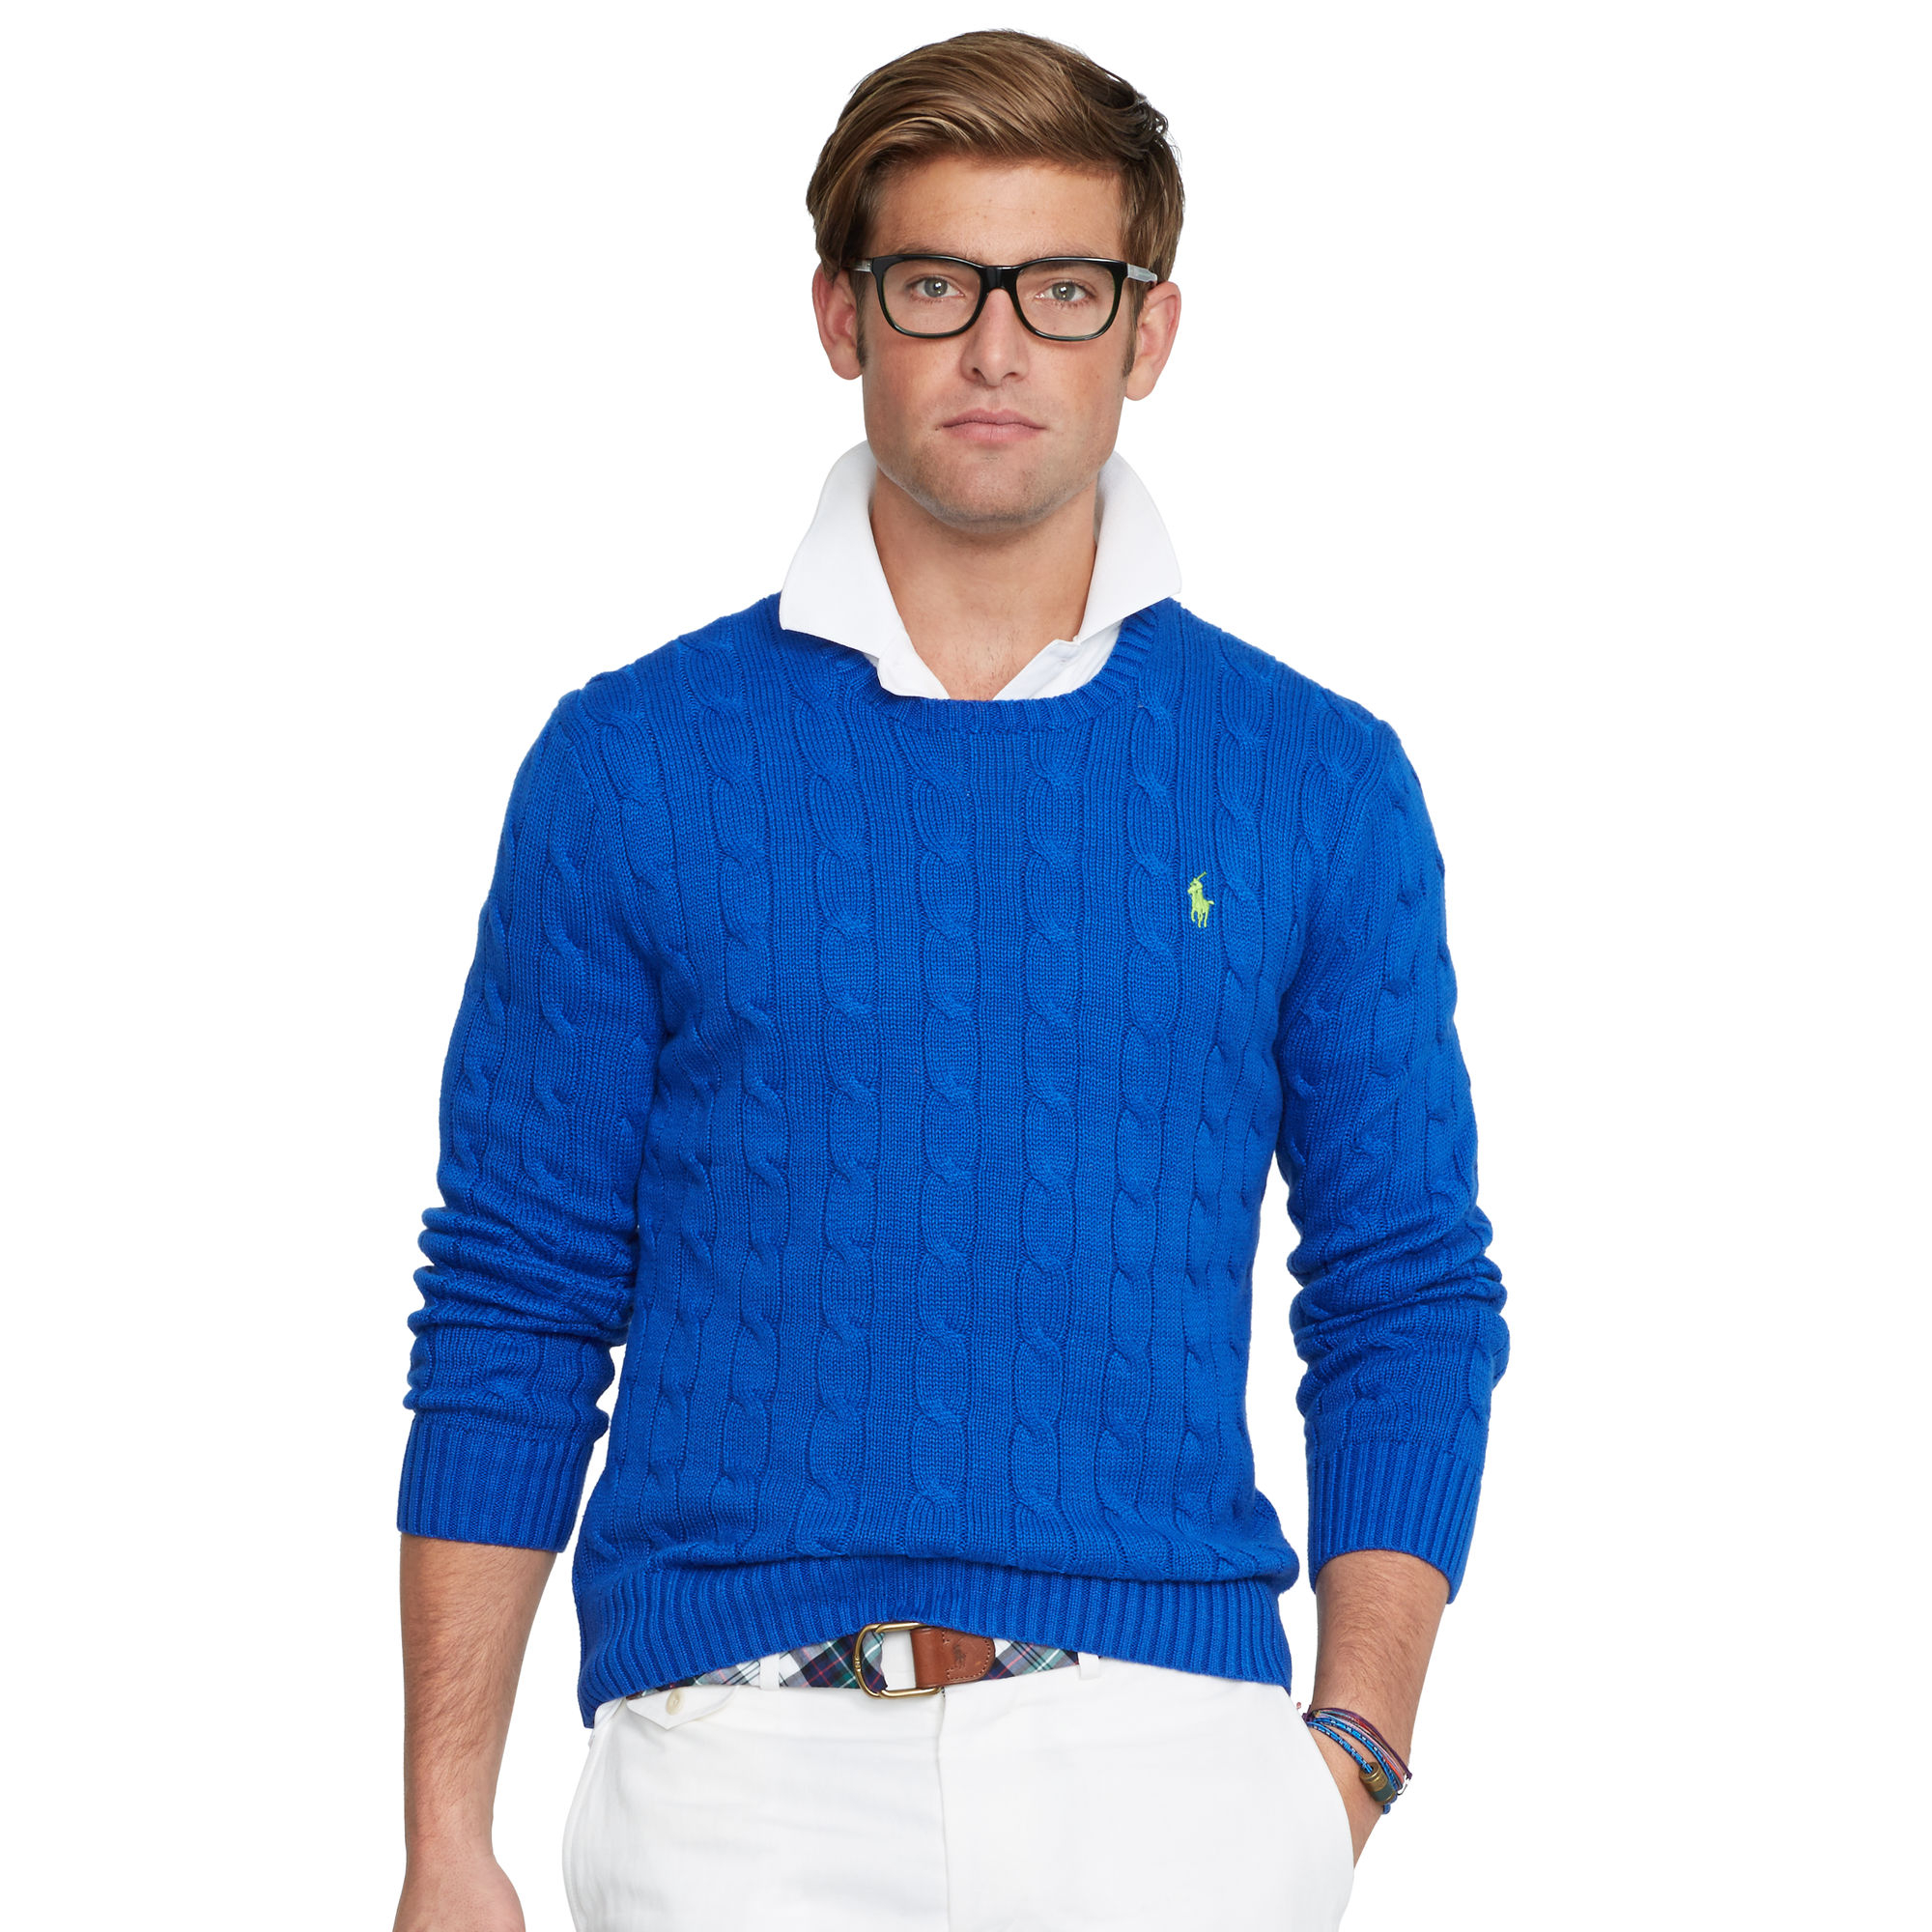 Polo Ralph Lauren Cable-knit Cotton Sweater in Blue for Men - Lyst